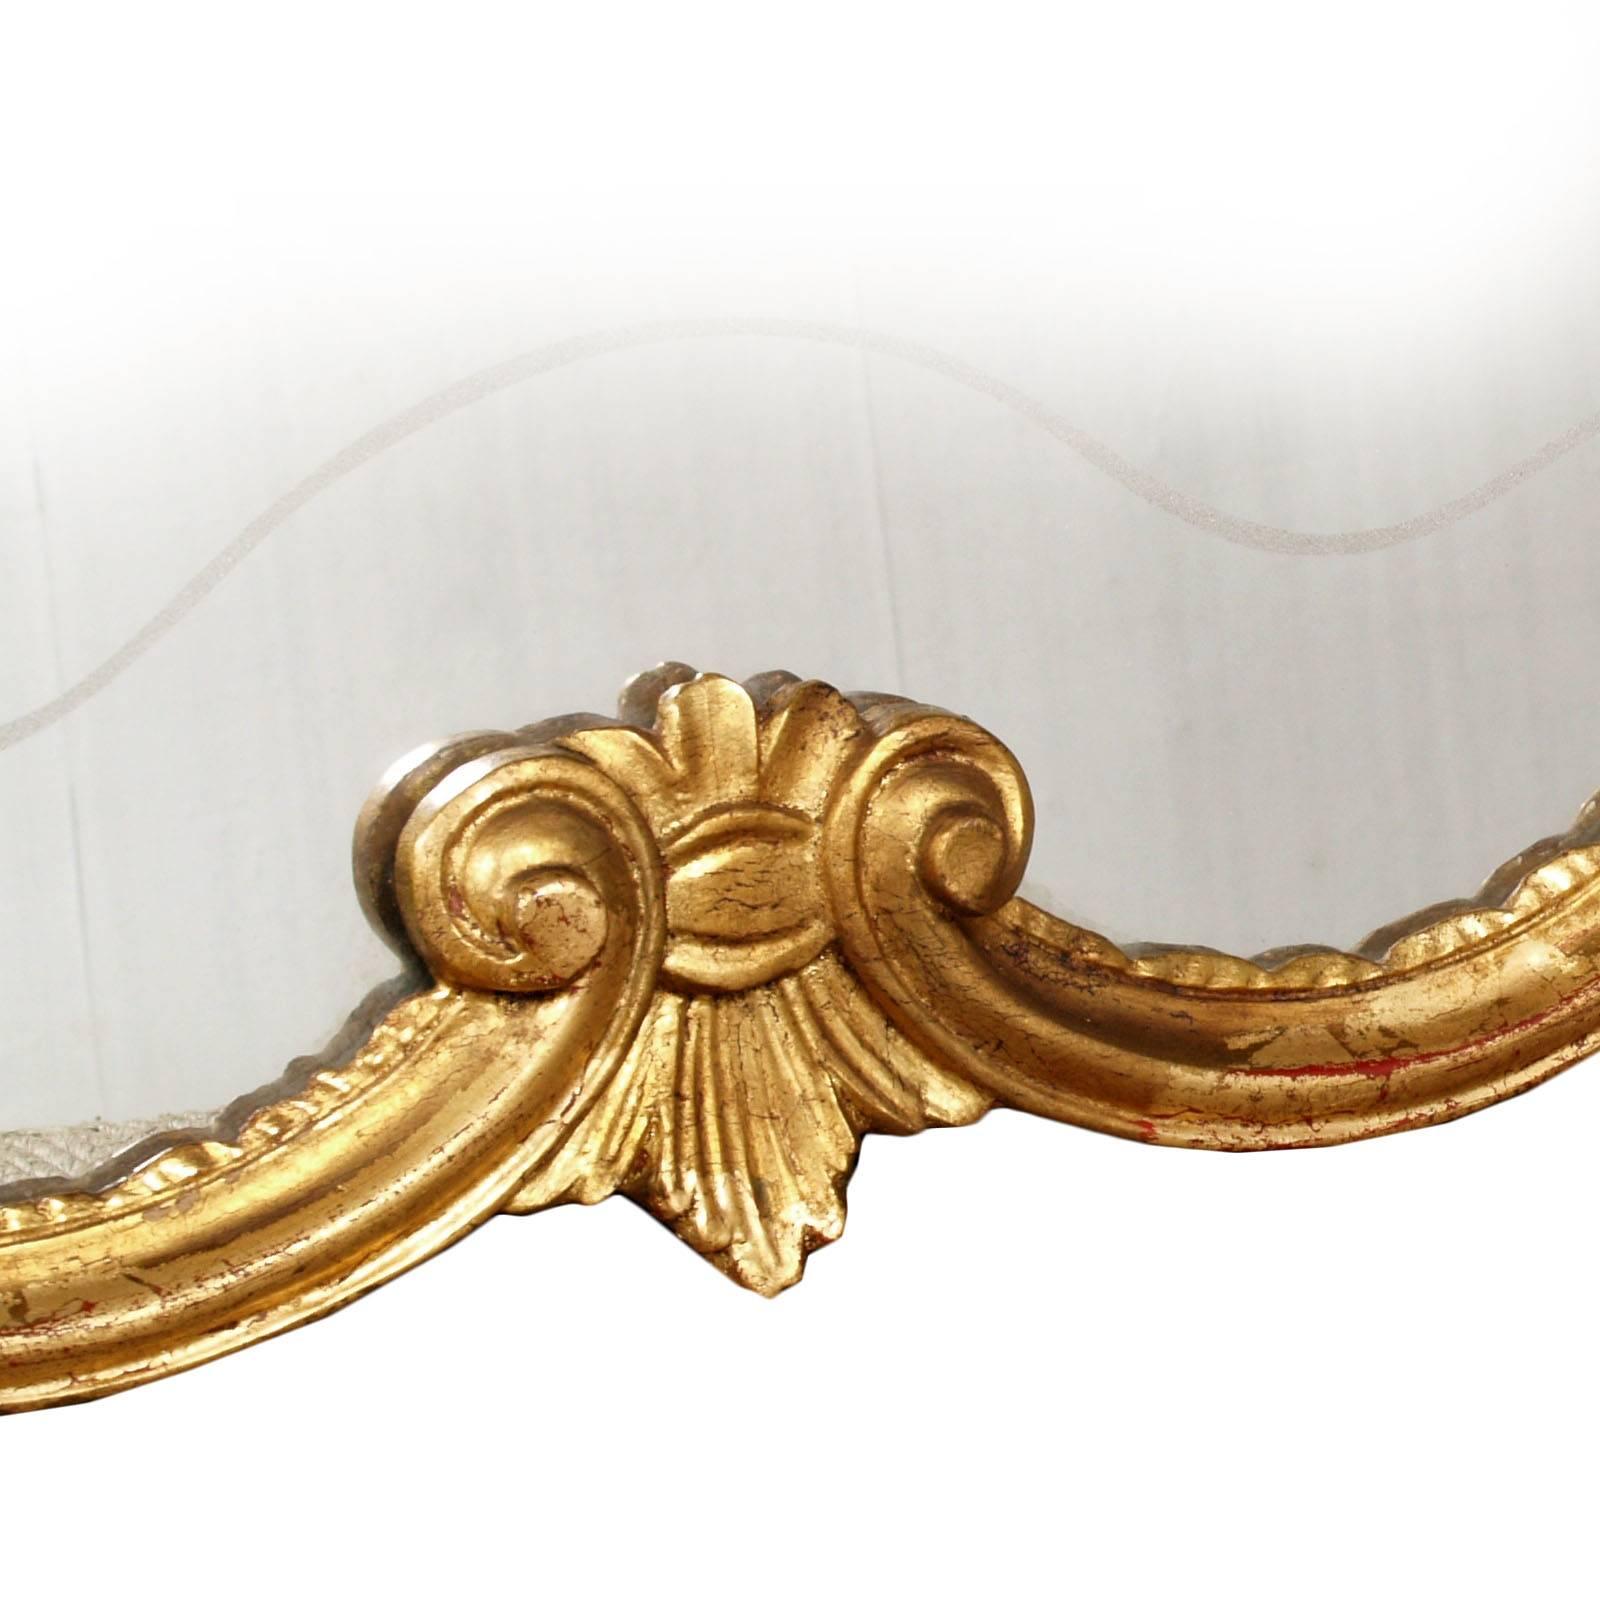 Baroque Revival 19th Century Venetian Baroque Mirror in Hand-Carved Walnut Gold Leaf Finish